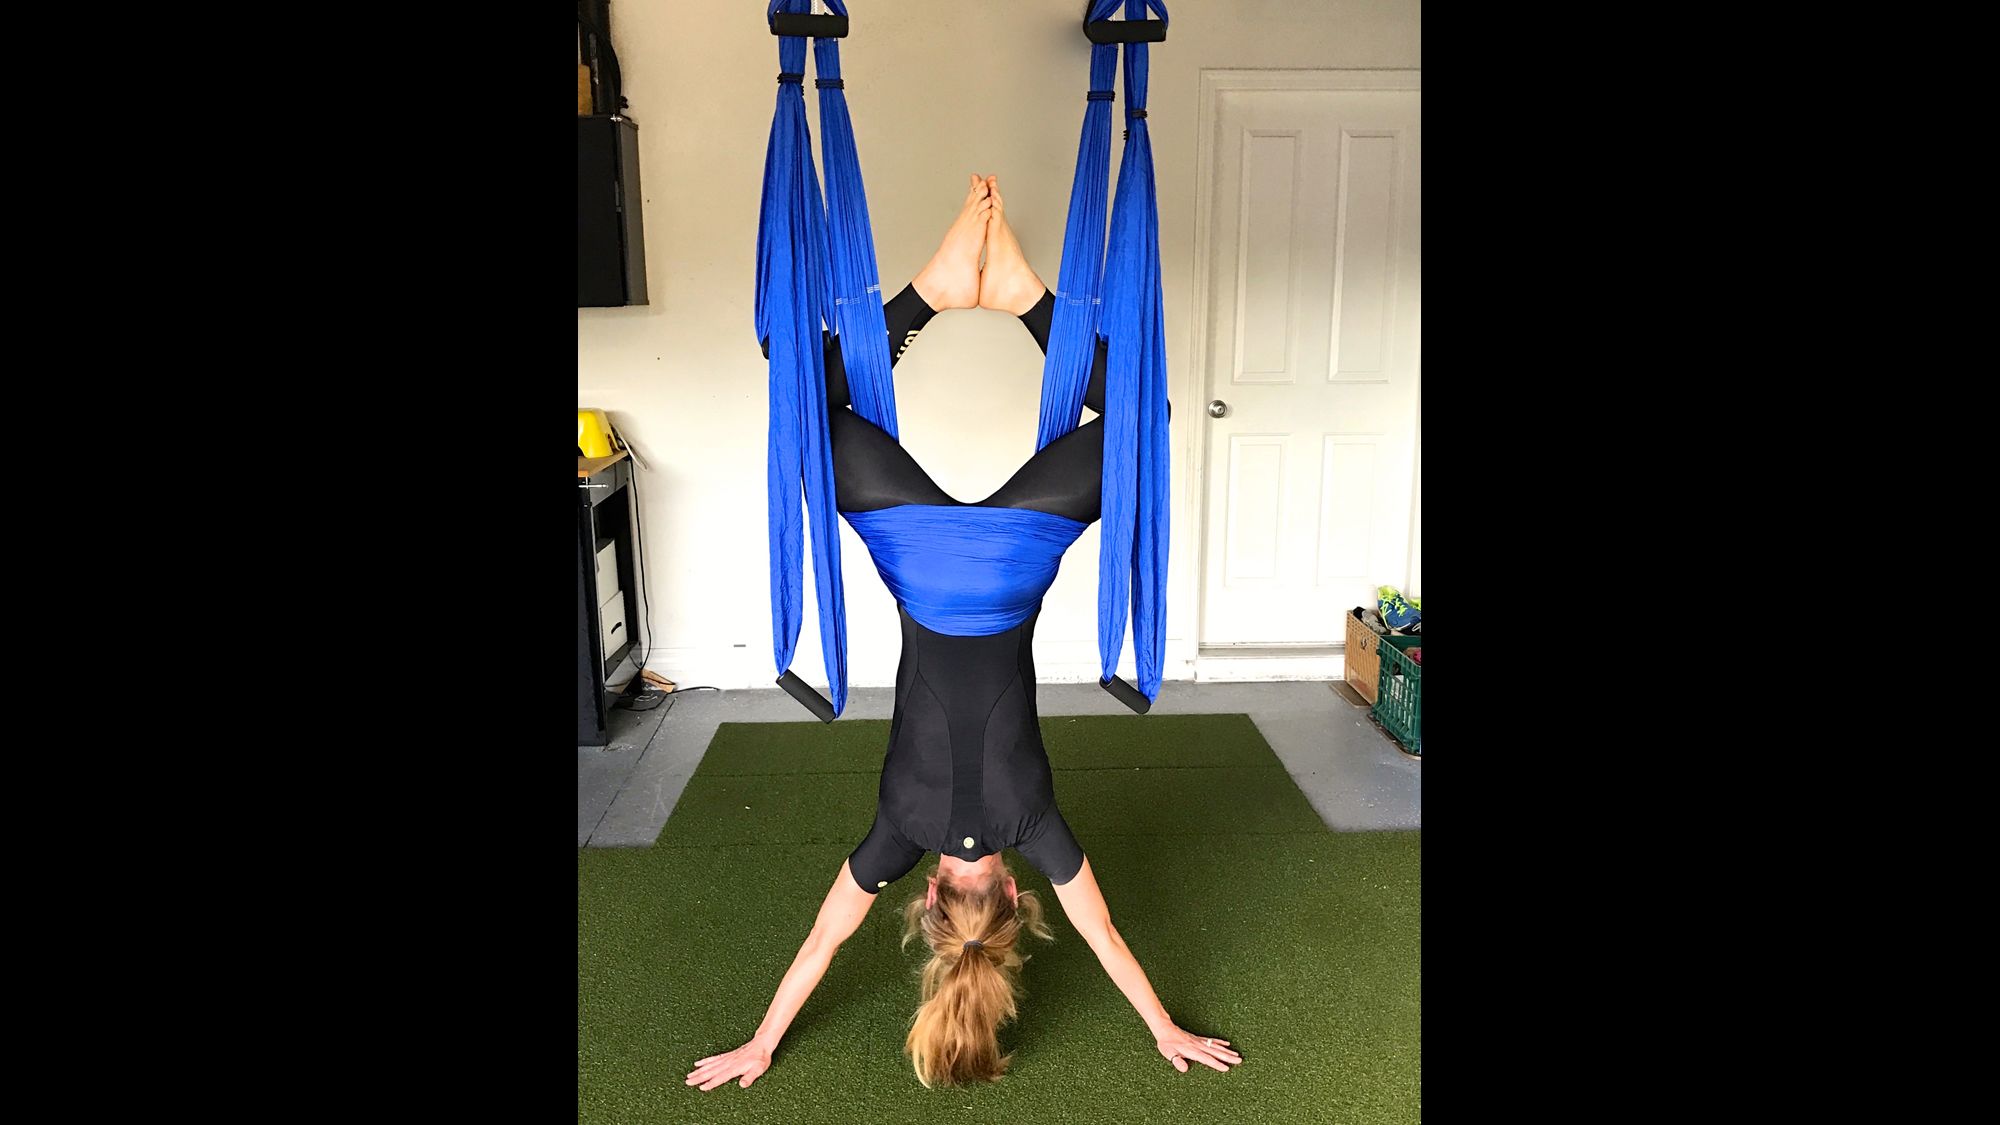 Take a swing at aerial yoga at home